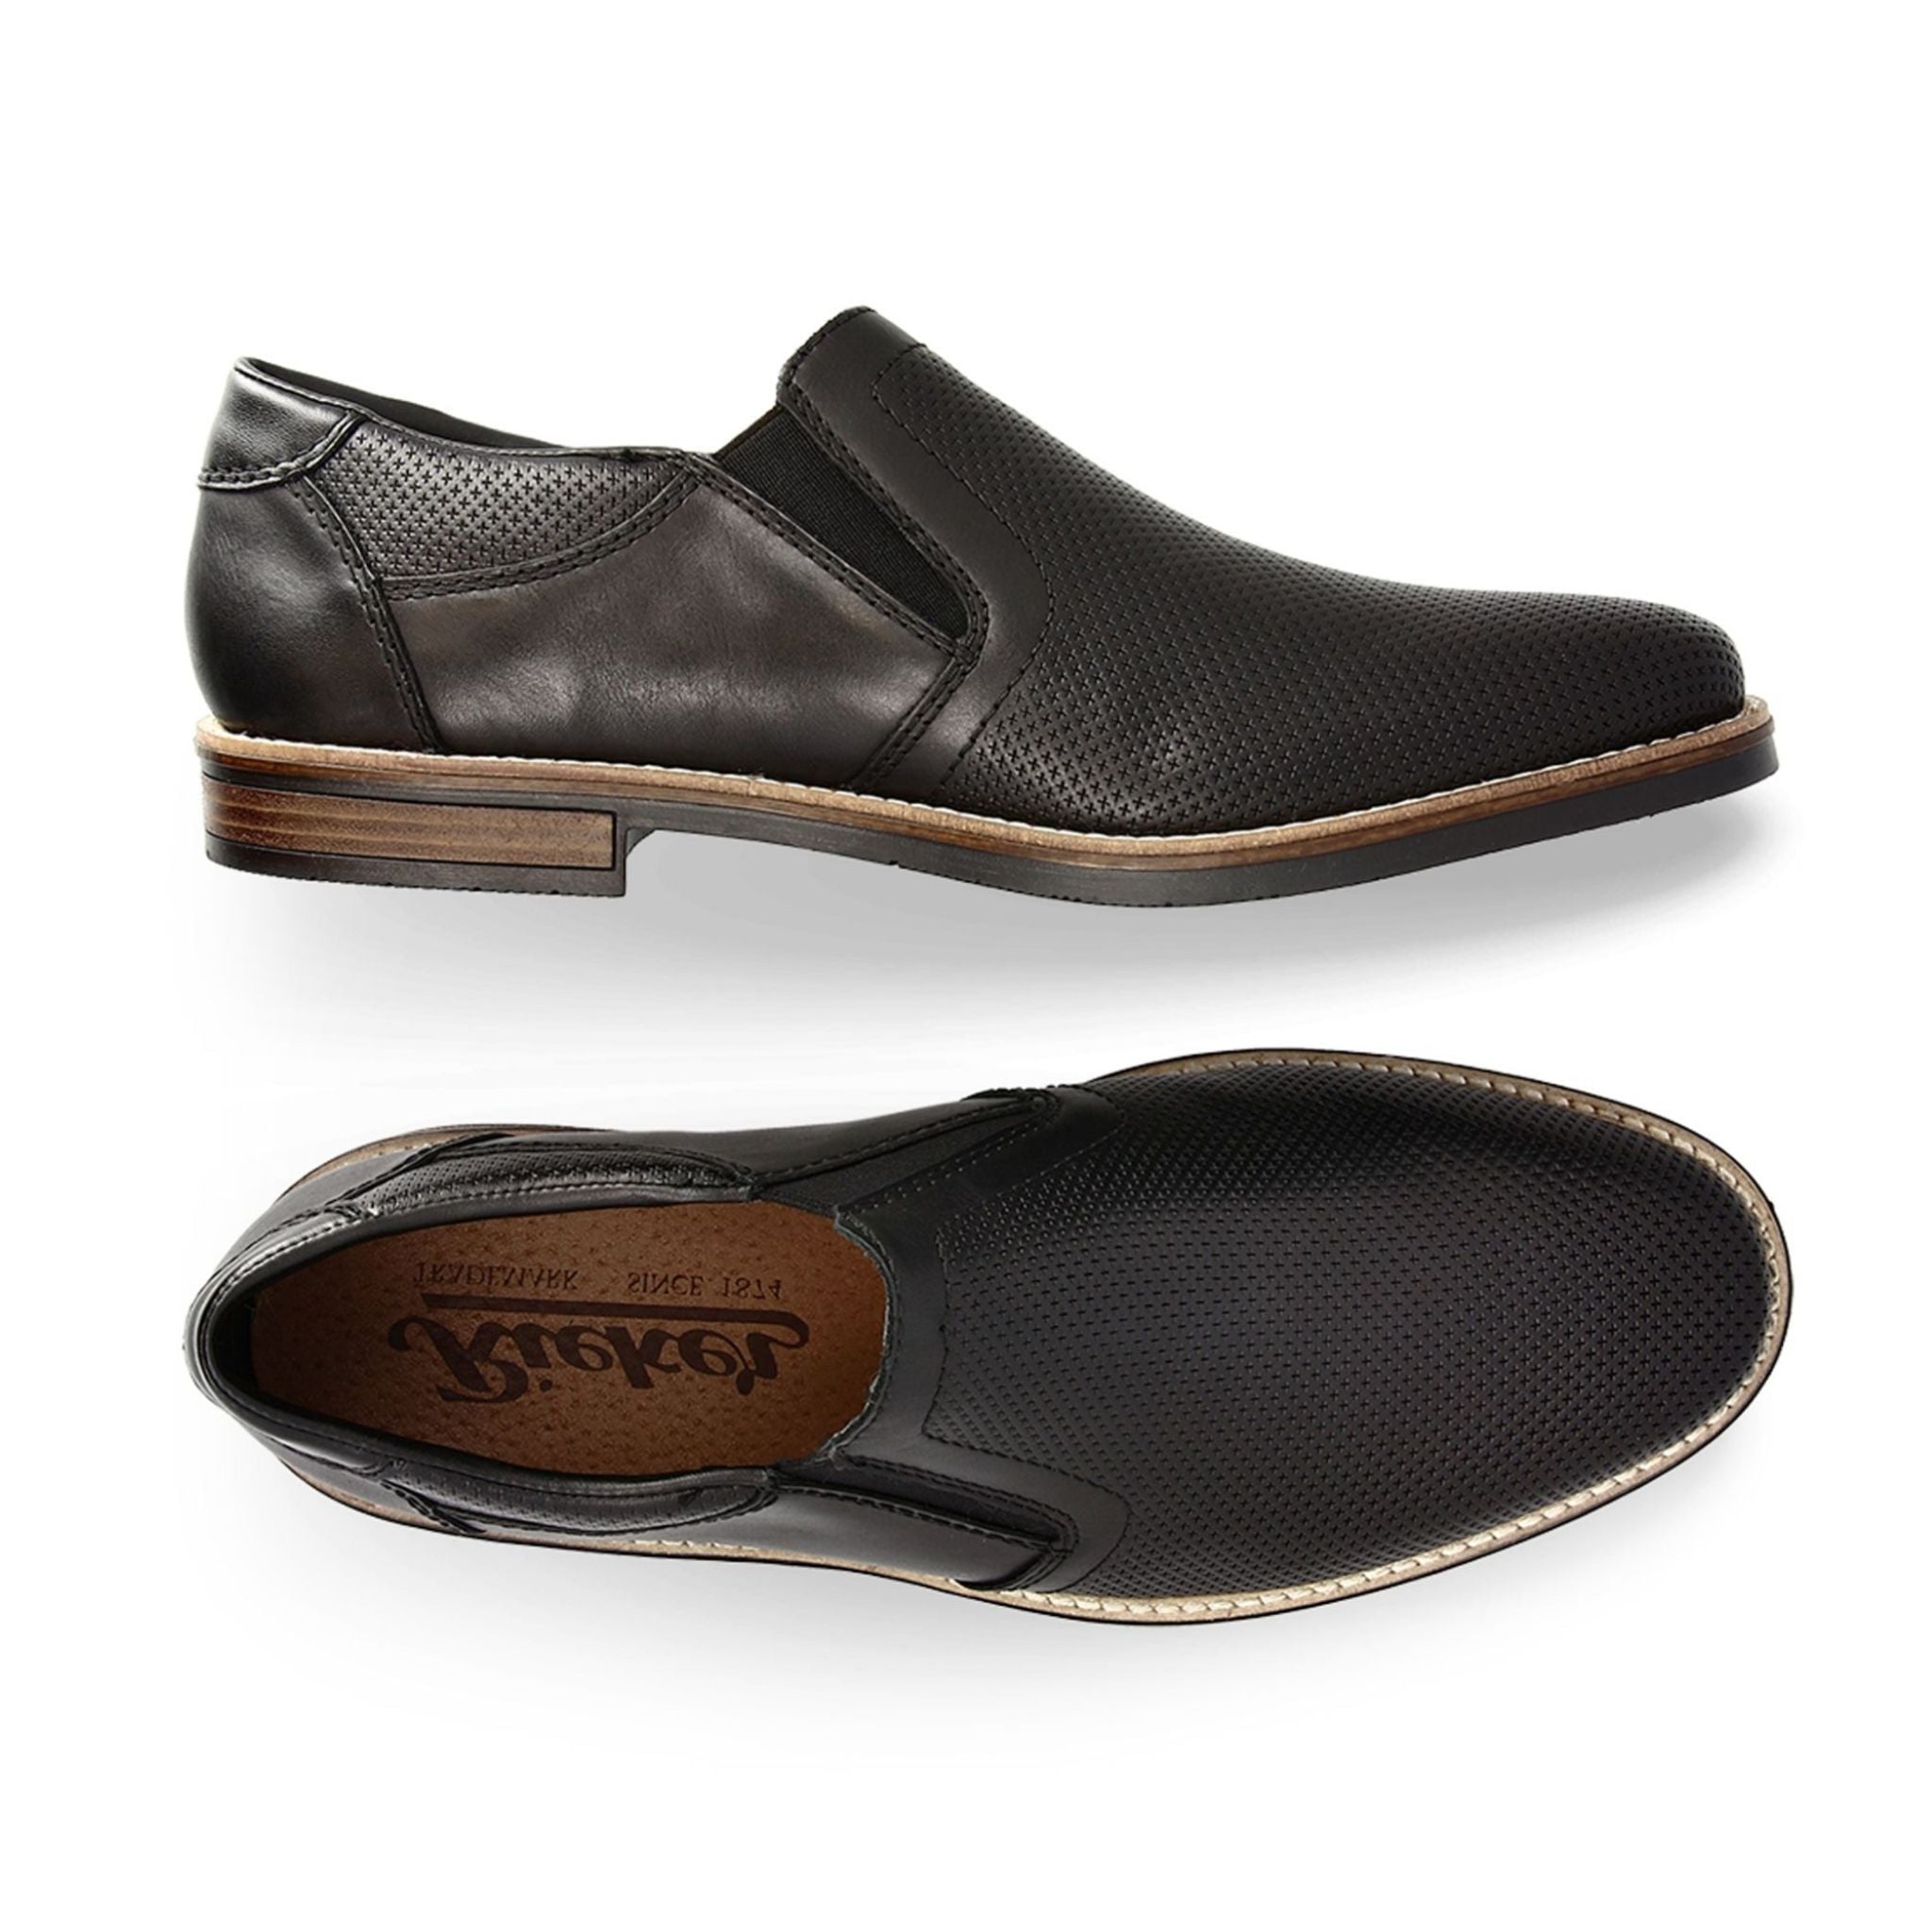 Top and siede view of men's Rieker black, semi-dress loafer with perforations.